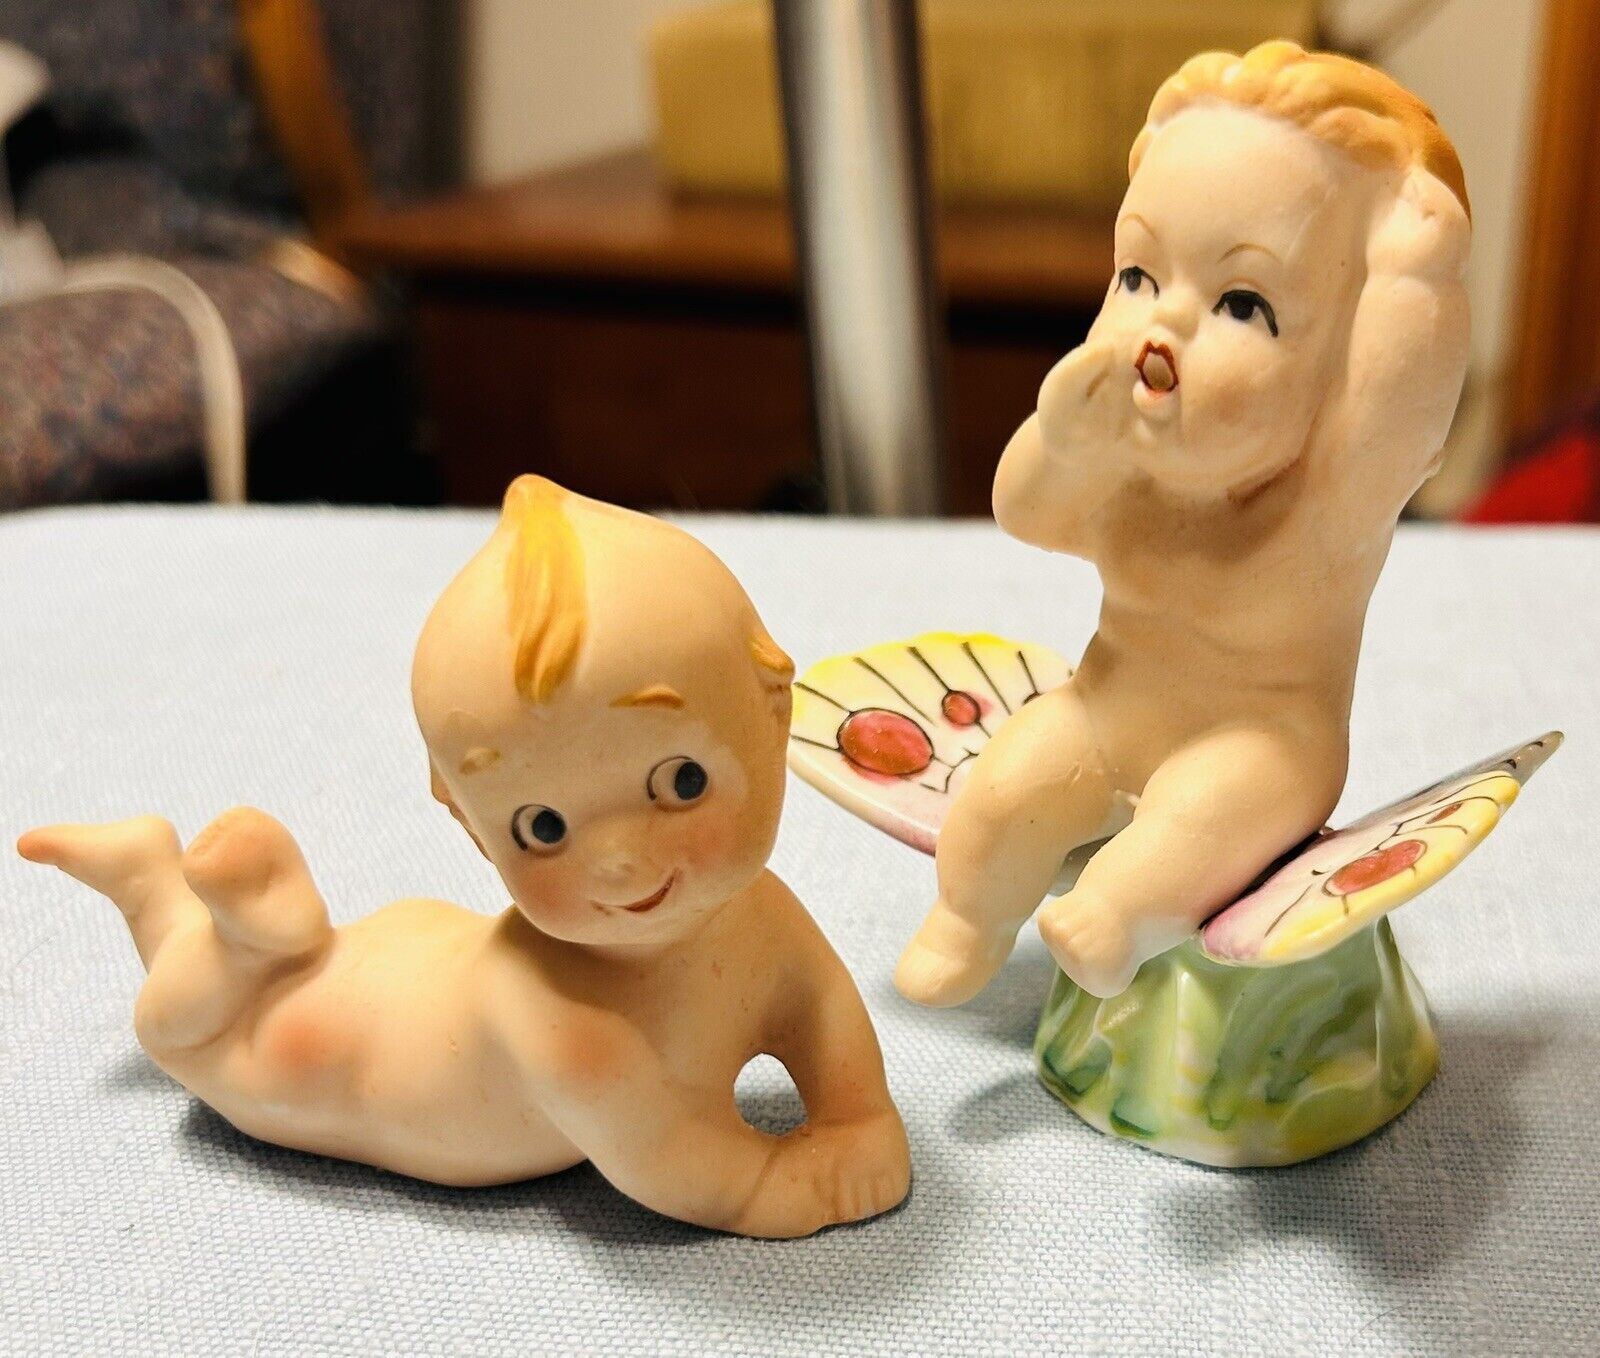 Pair of Vintage Kewpie Figurines Rare and Unusual Japan 2 for 1 Price Uniqueness